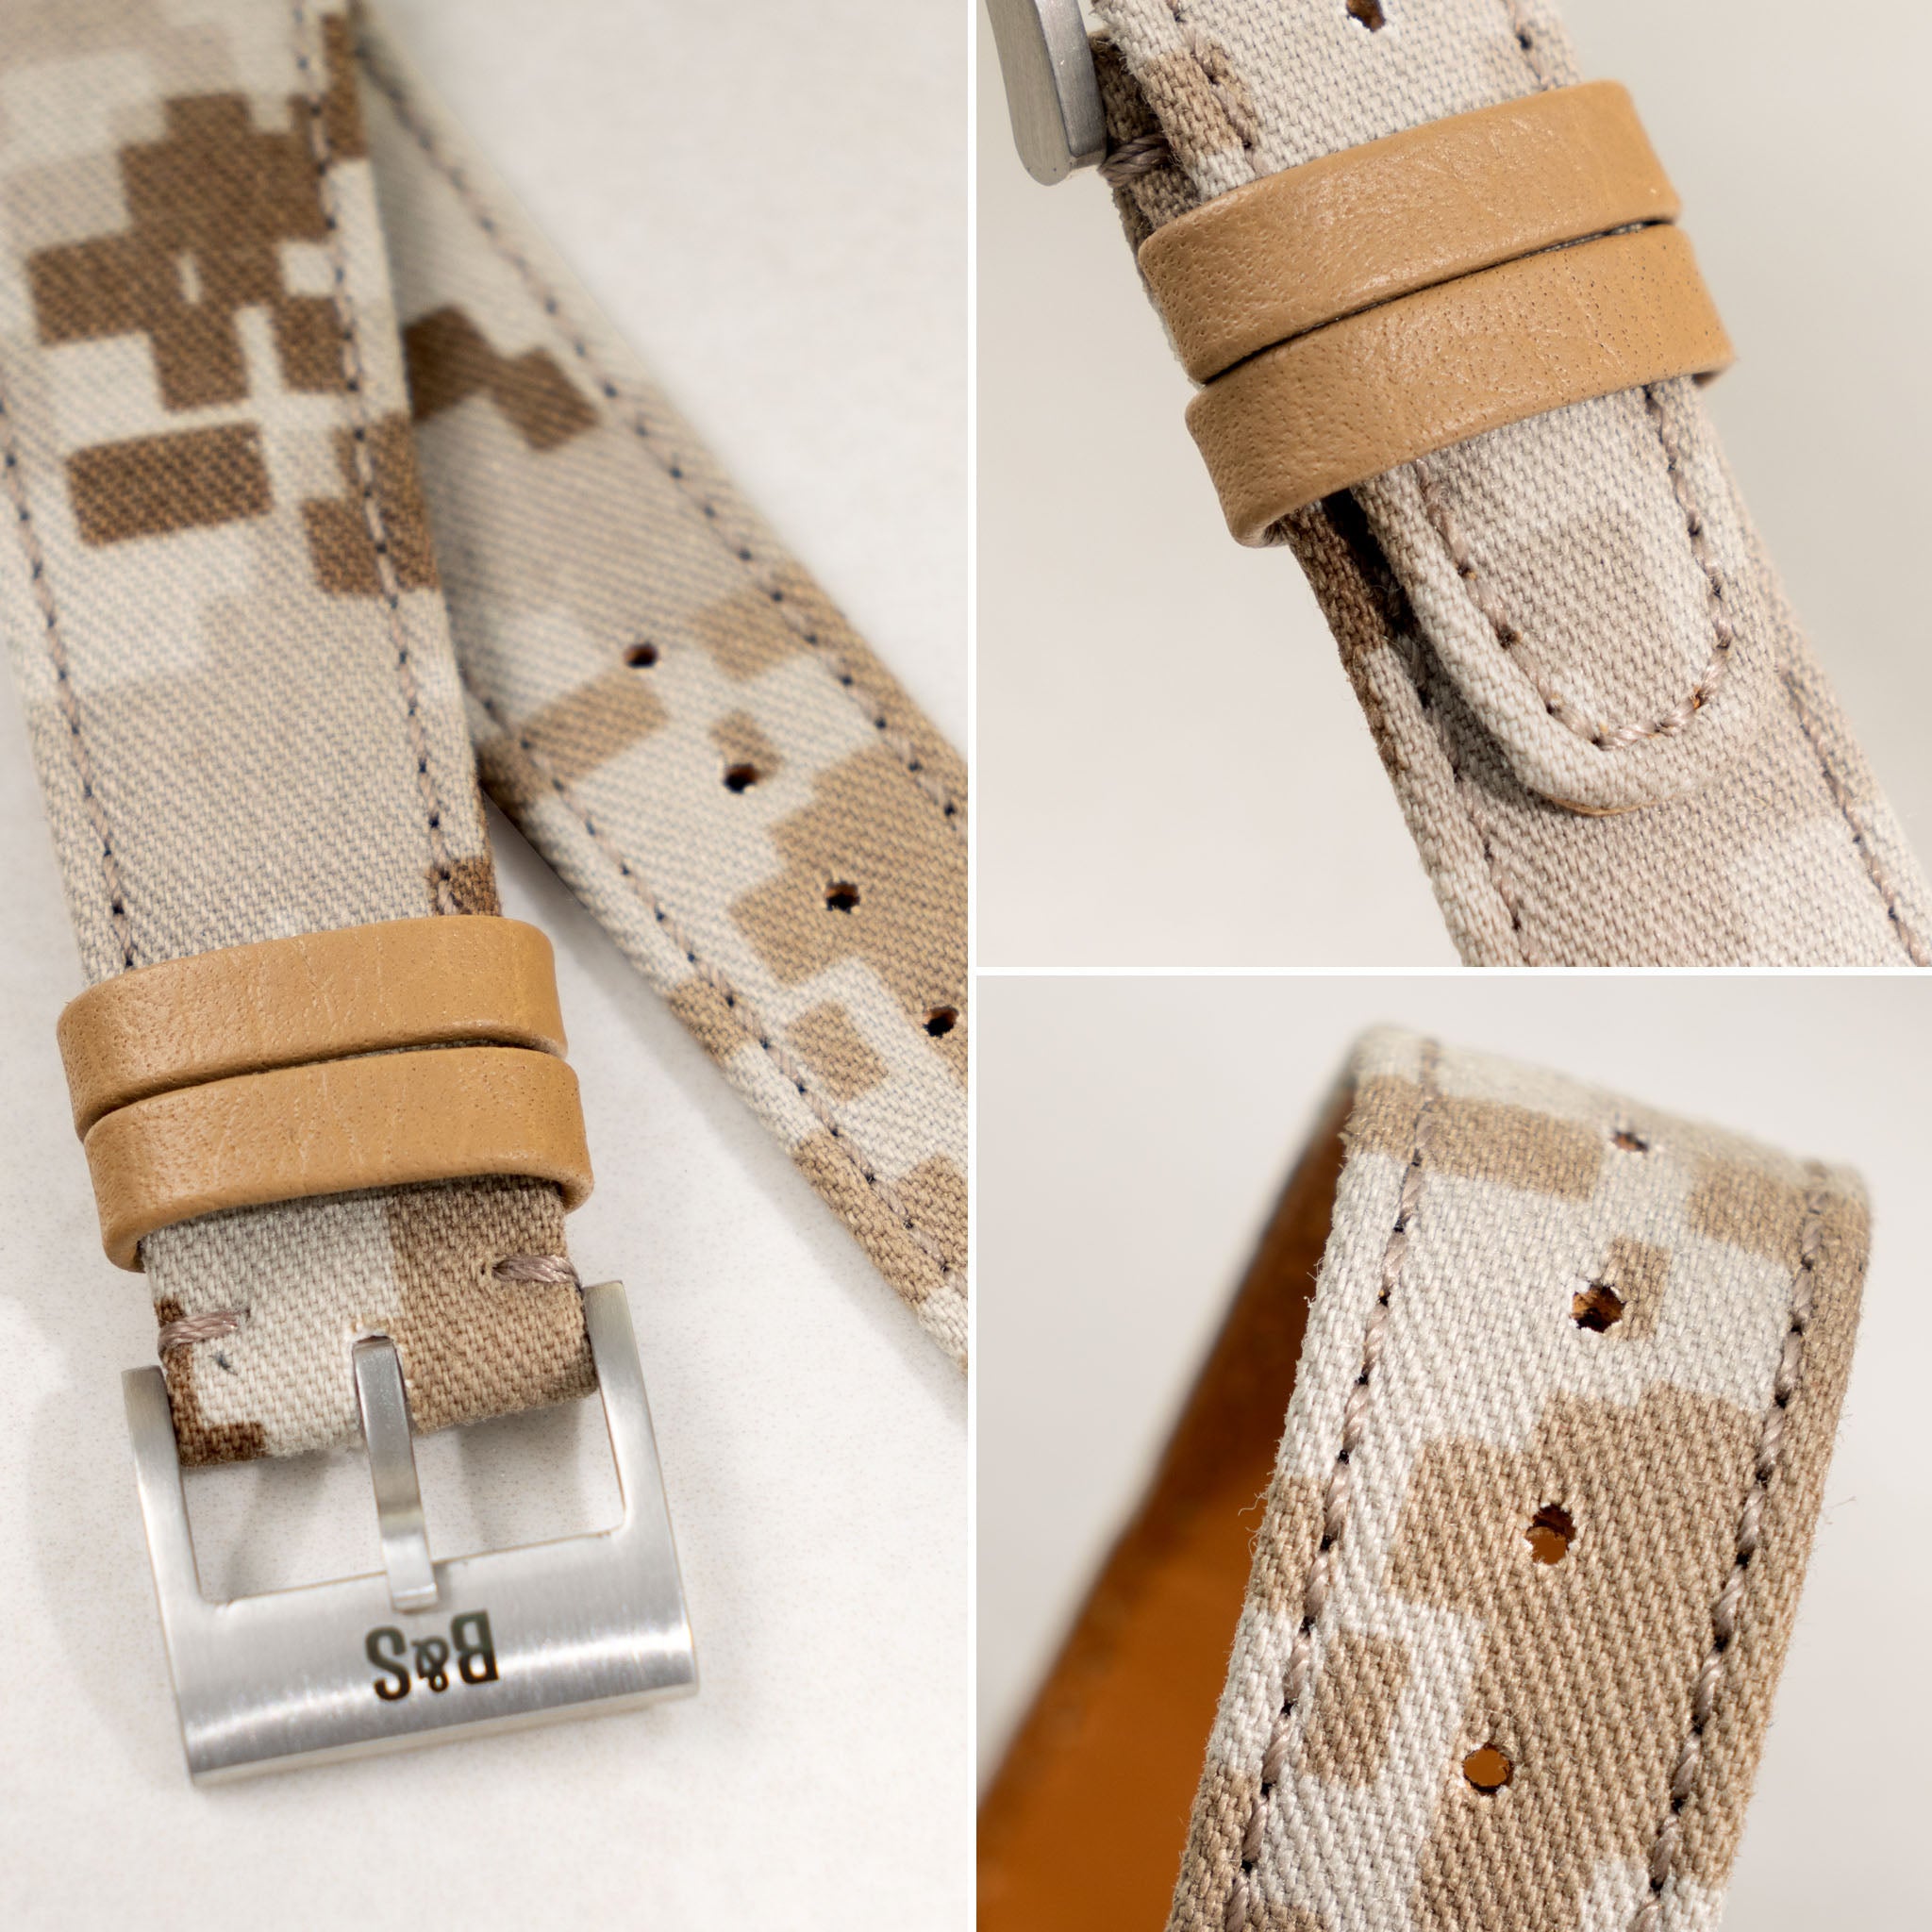 The Brooklyn Camo Watch Strap – Made From Original US Army Fabric – Jubilee Edition